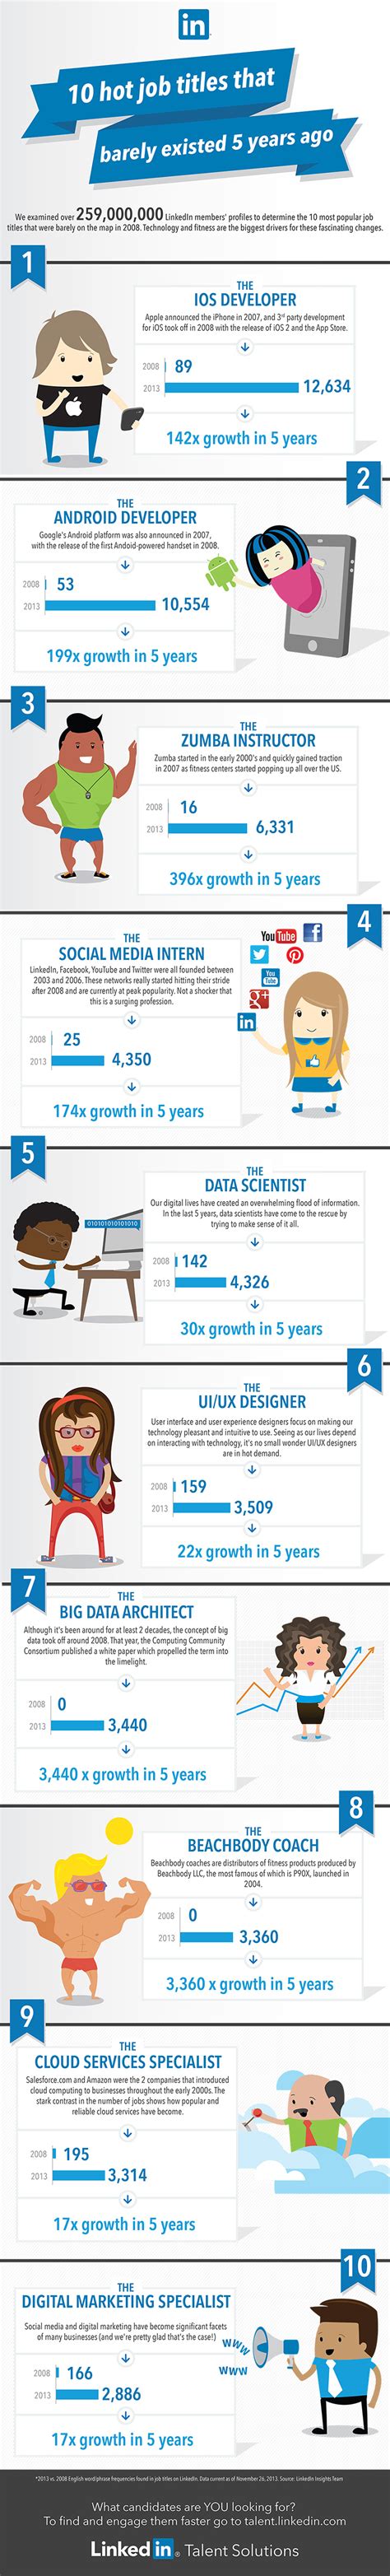 Top 10 Job Titles That Didnt Exist 5 Years Ago Infographic